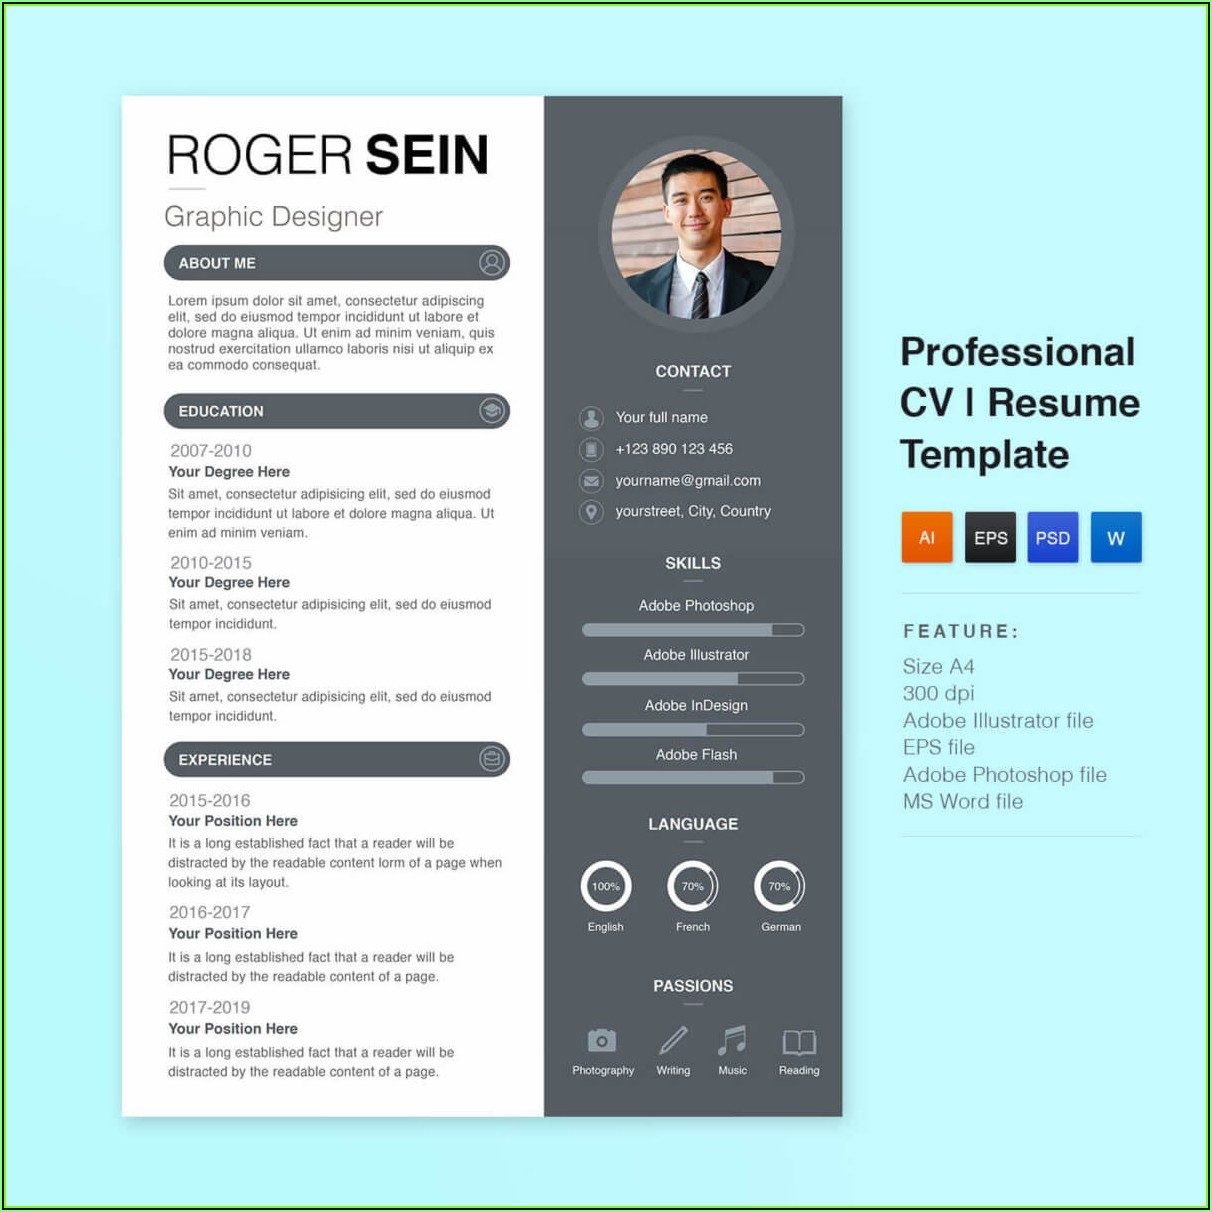 Resume Templates For Experienced It Professionals Free Download